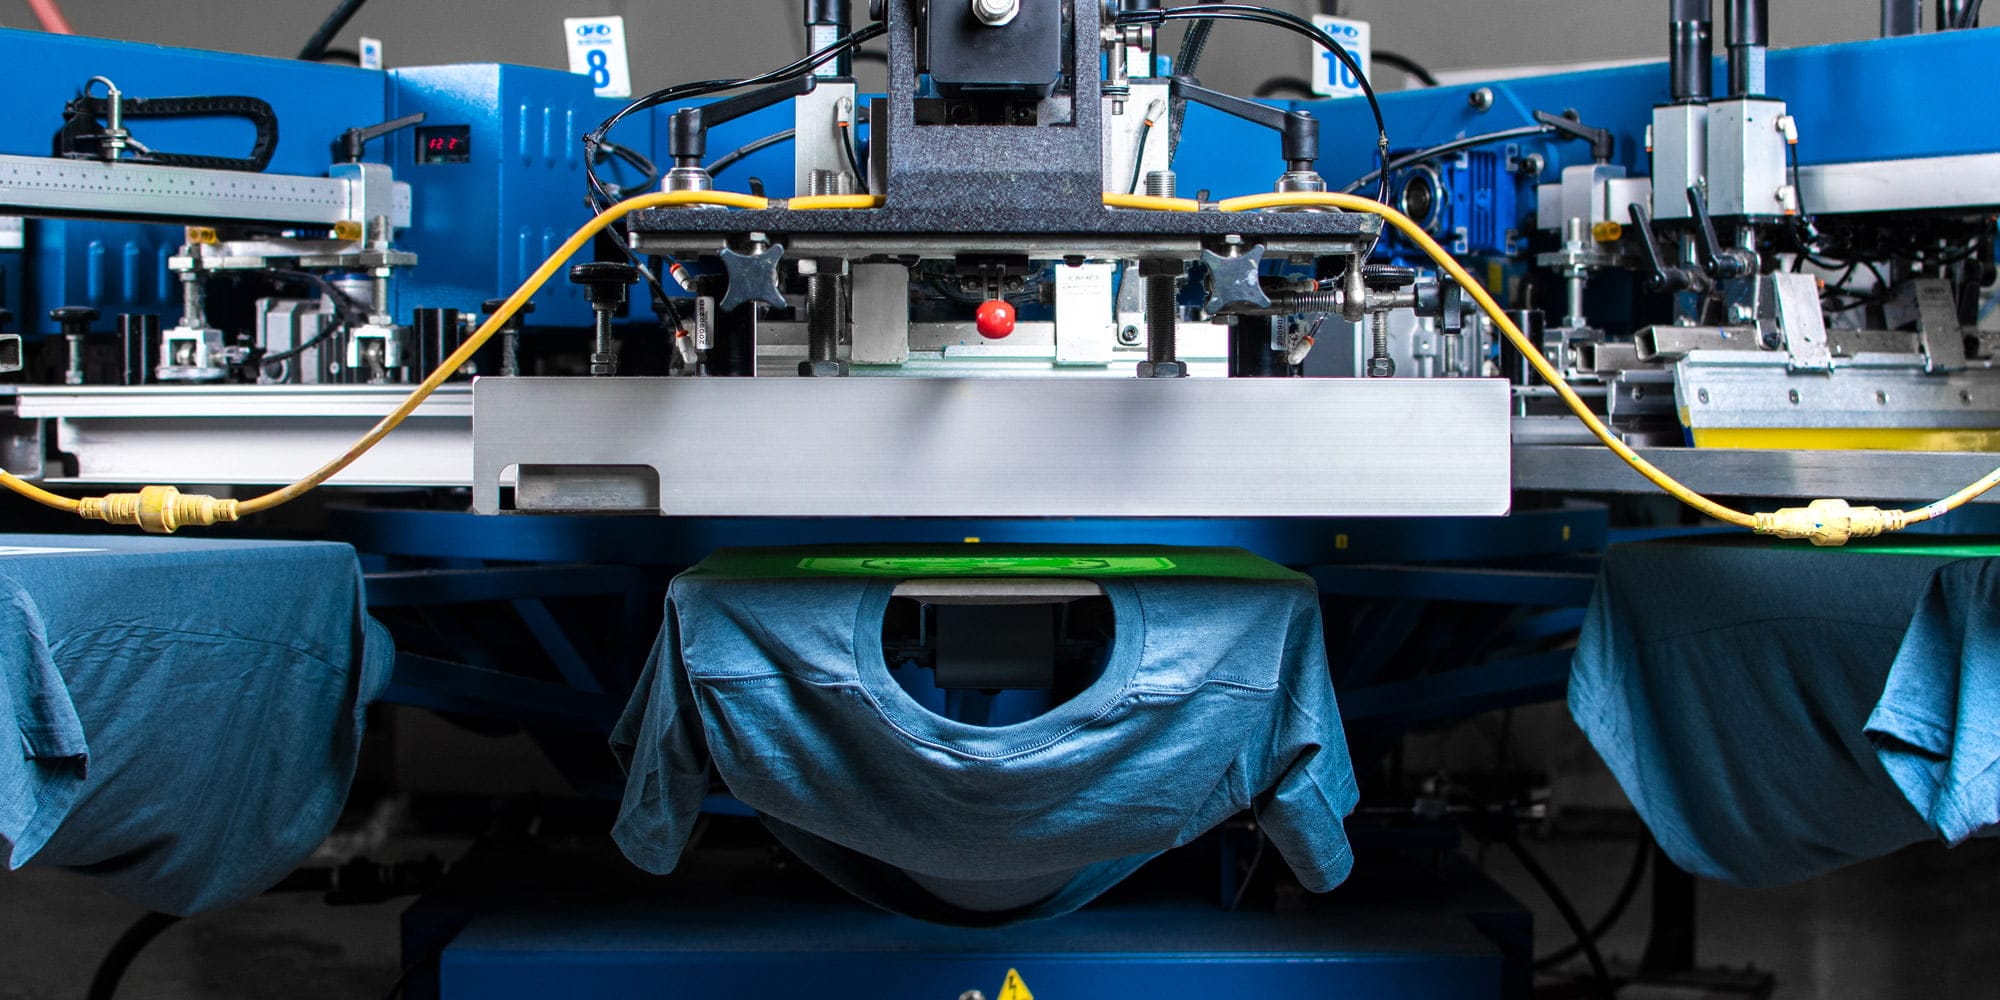 Artistic perspective of an automatic screen printing press showing shirts being printed.